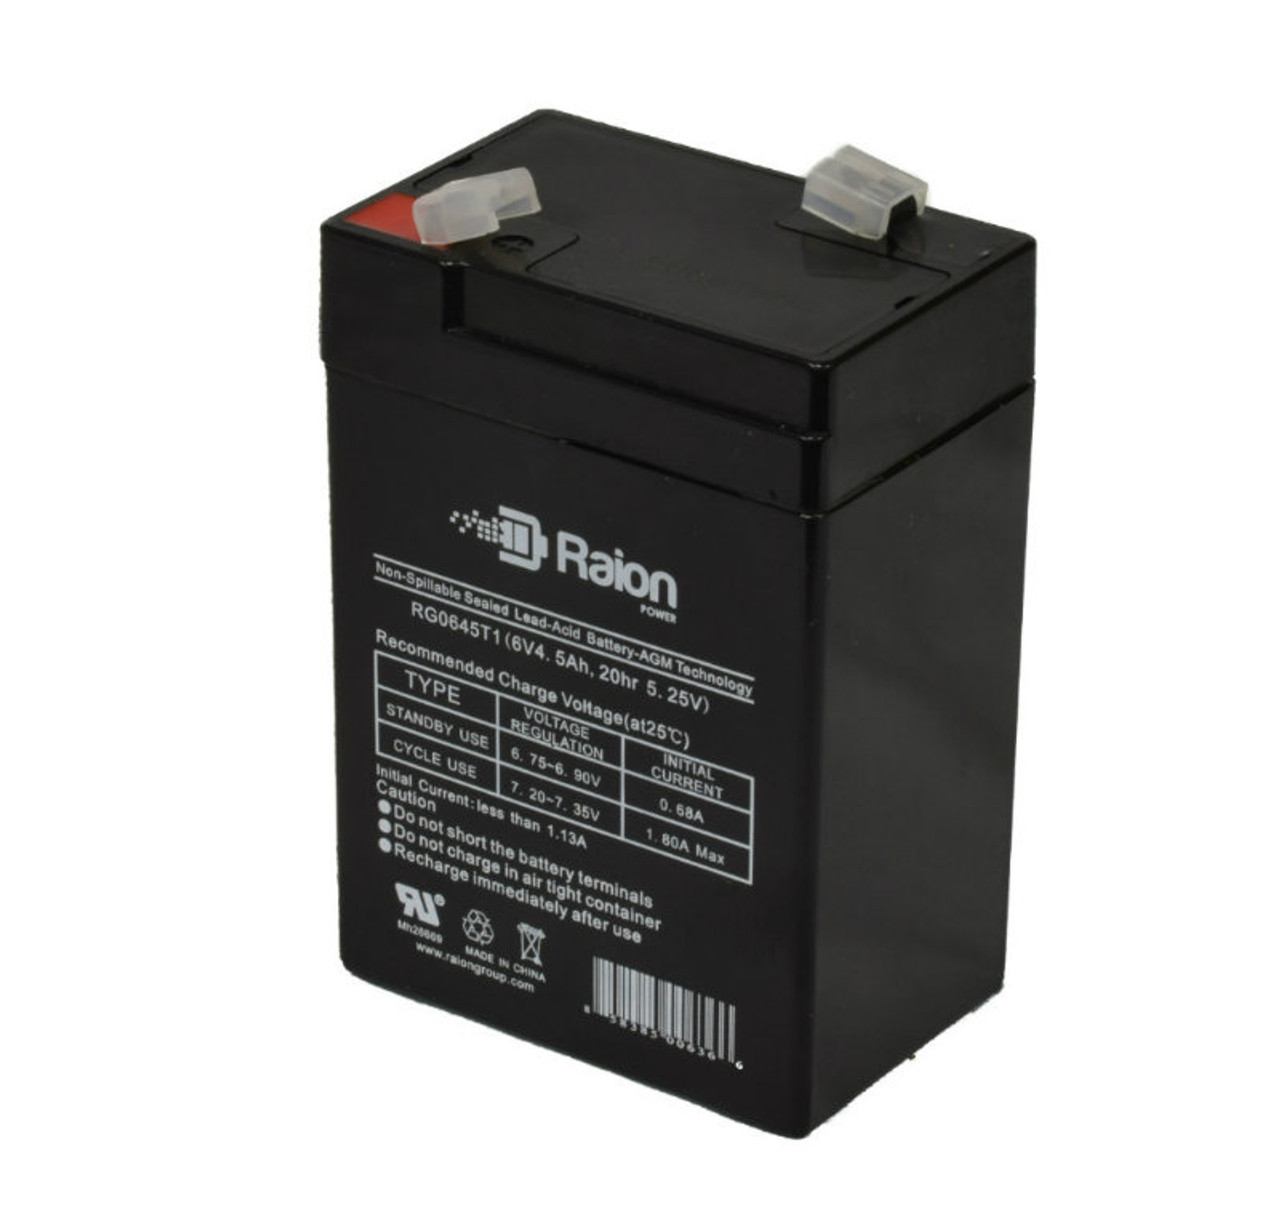 Raion Power RG0645T1 6V 4.5Ah Replacement Battery Cartridge for Sentry Lite Inflater